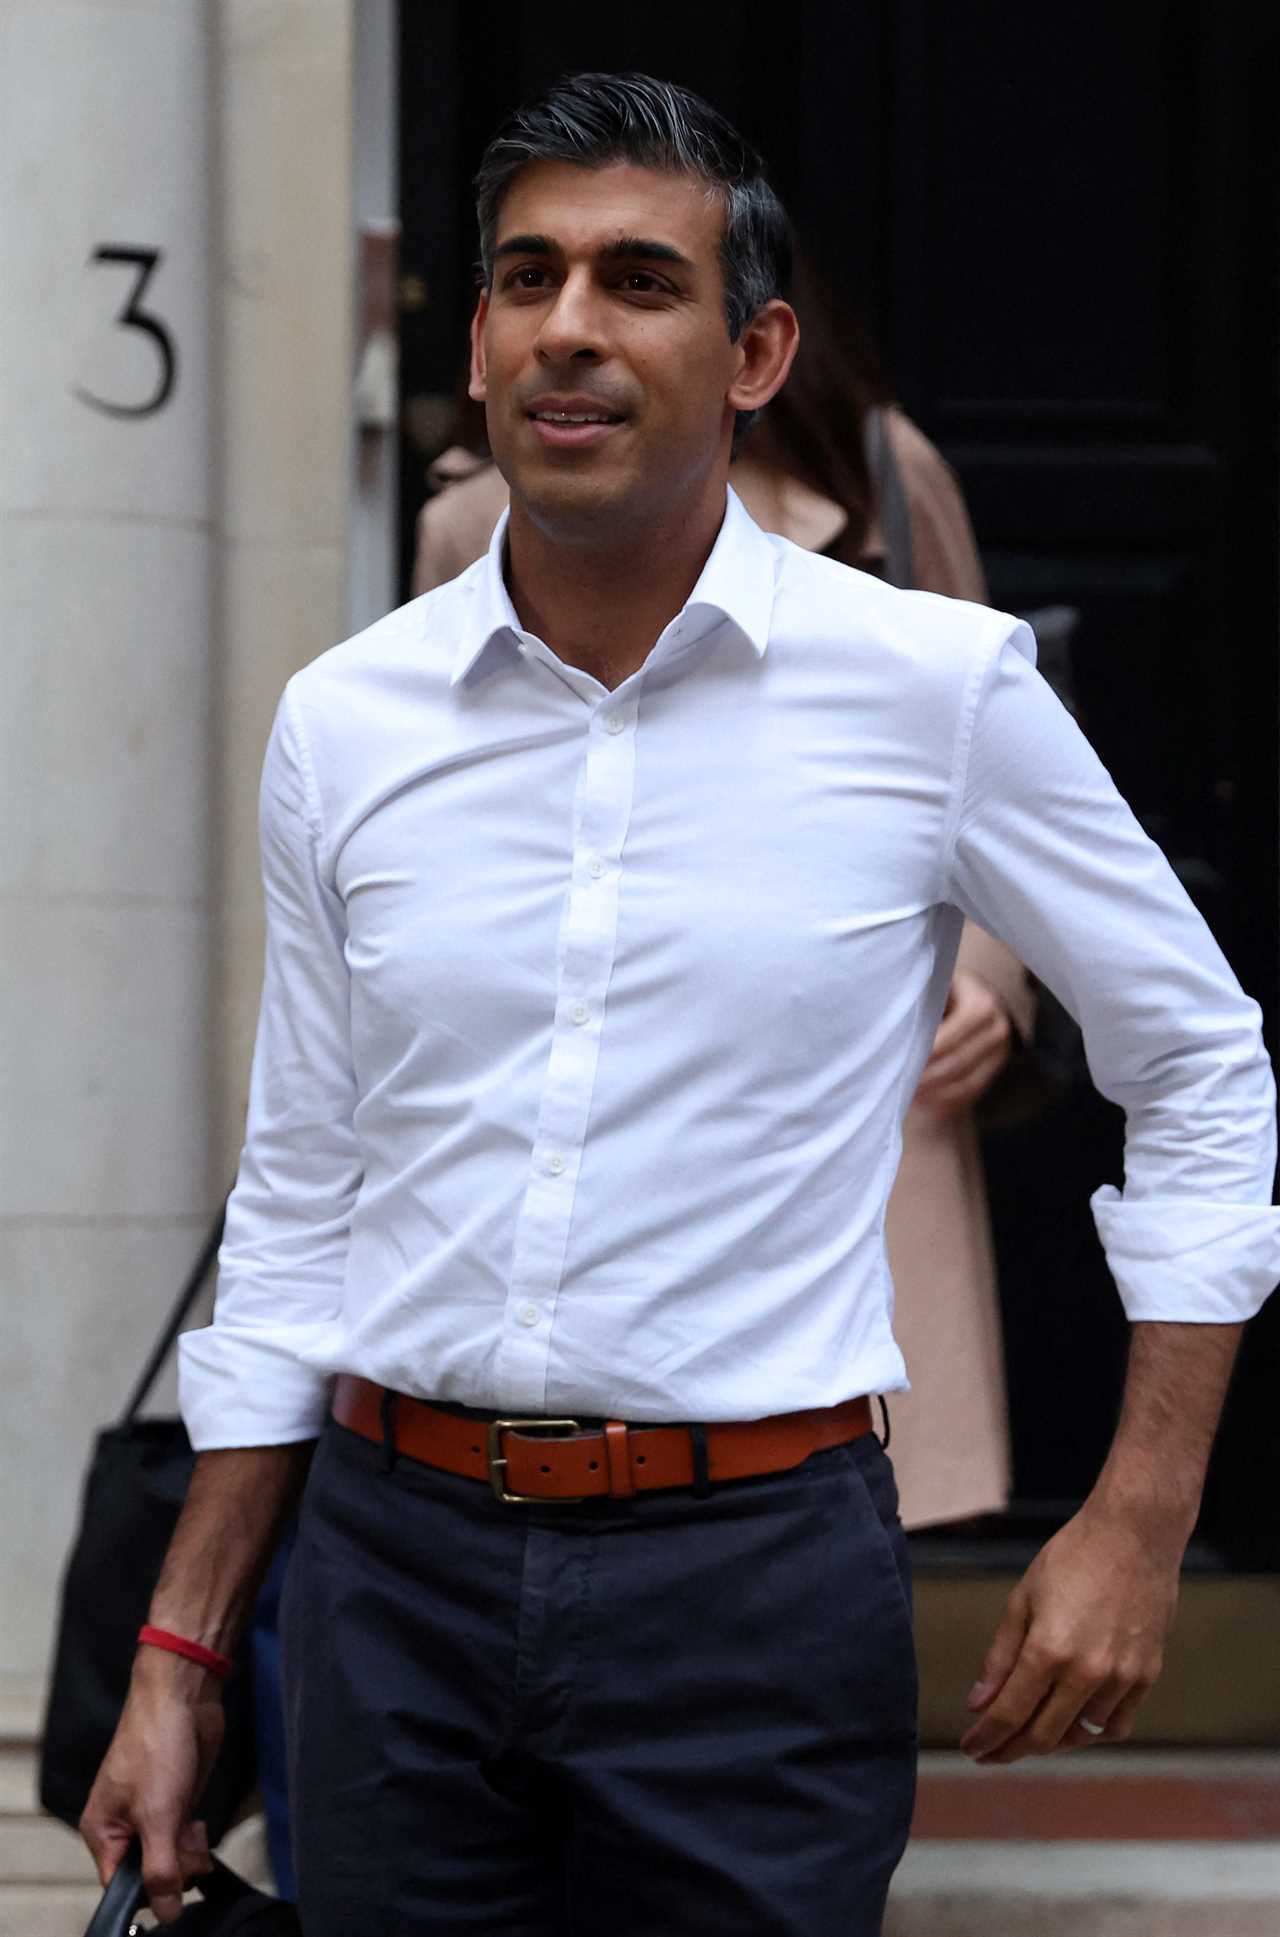 Boris Johnson dramatically PULLS OUT of PM race clearing way for Rishi Sunak v Penny Mordaunt contest for No10